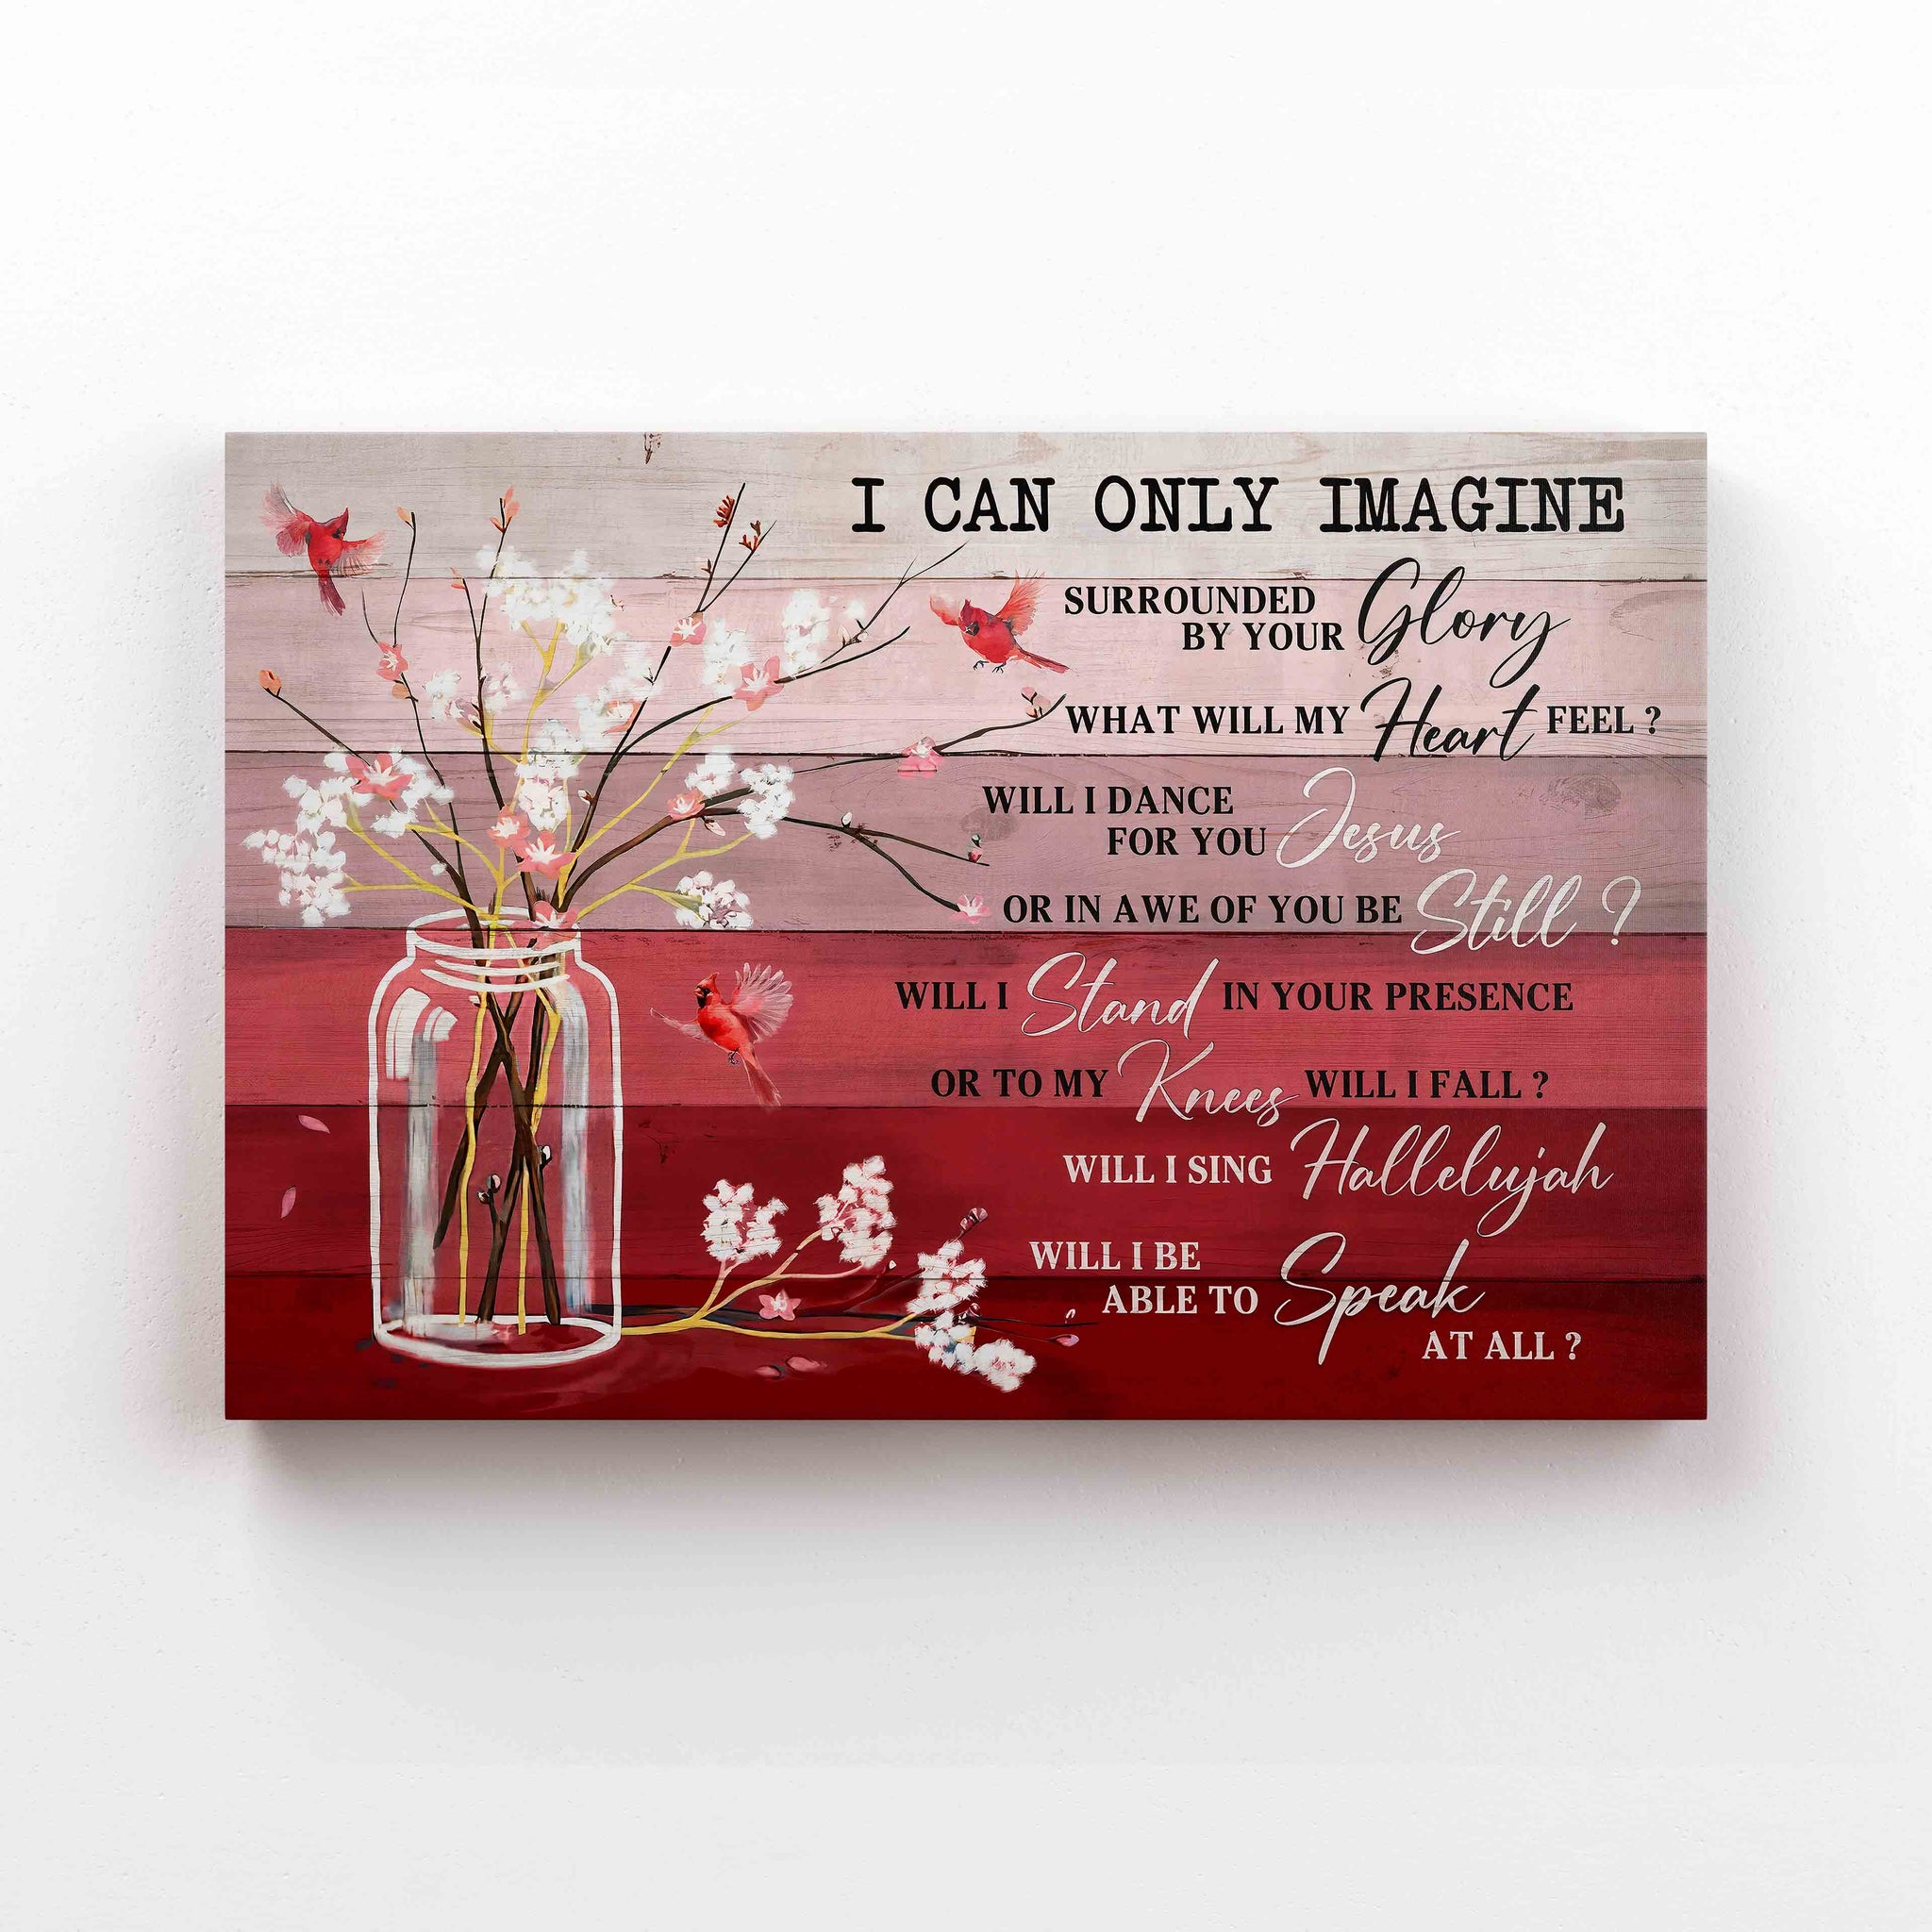 I Can Only Imagine Canvas, Red Cardinal Canvas, Flower Canvas, Memorial Canvas, Gift Canvas